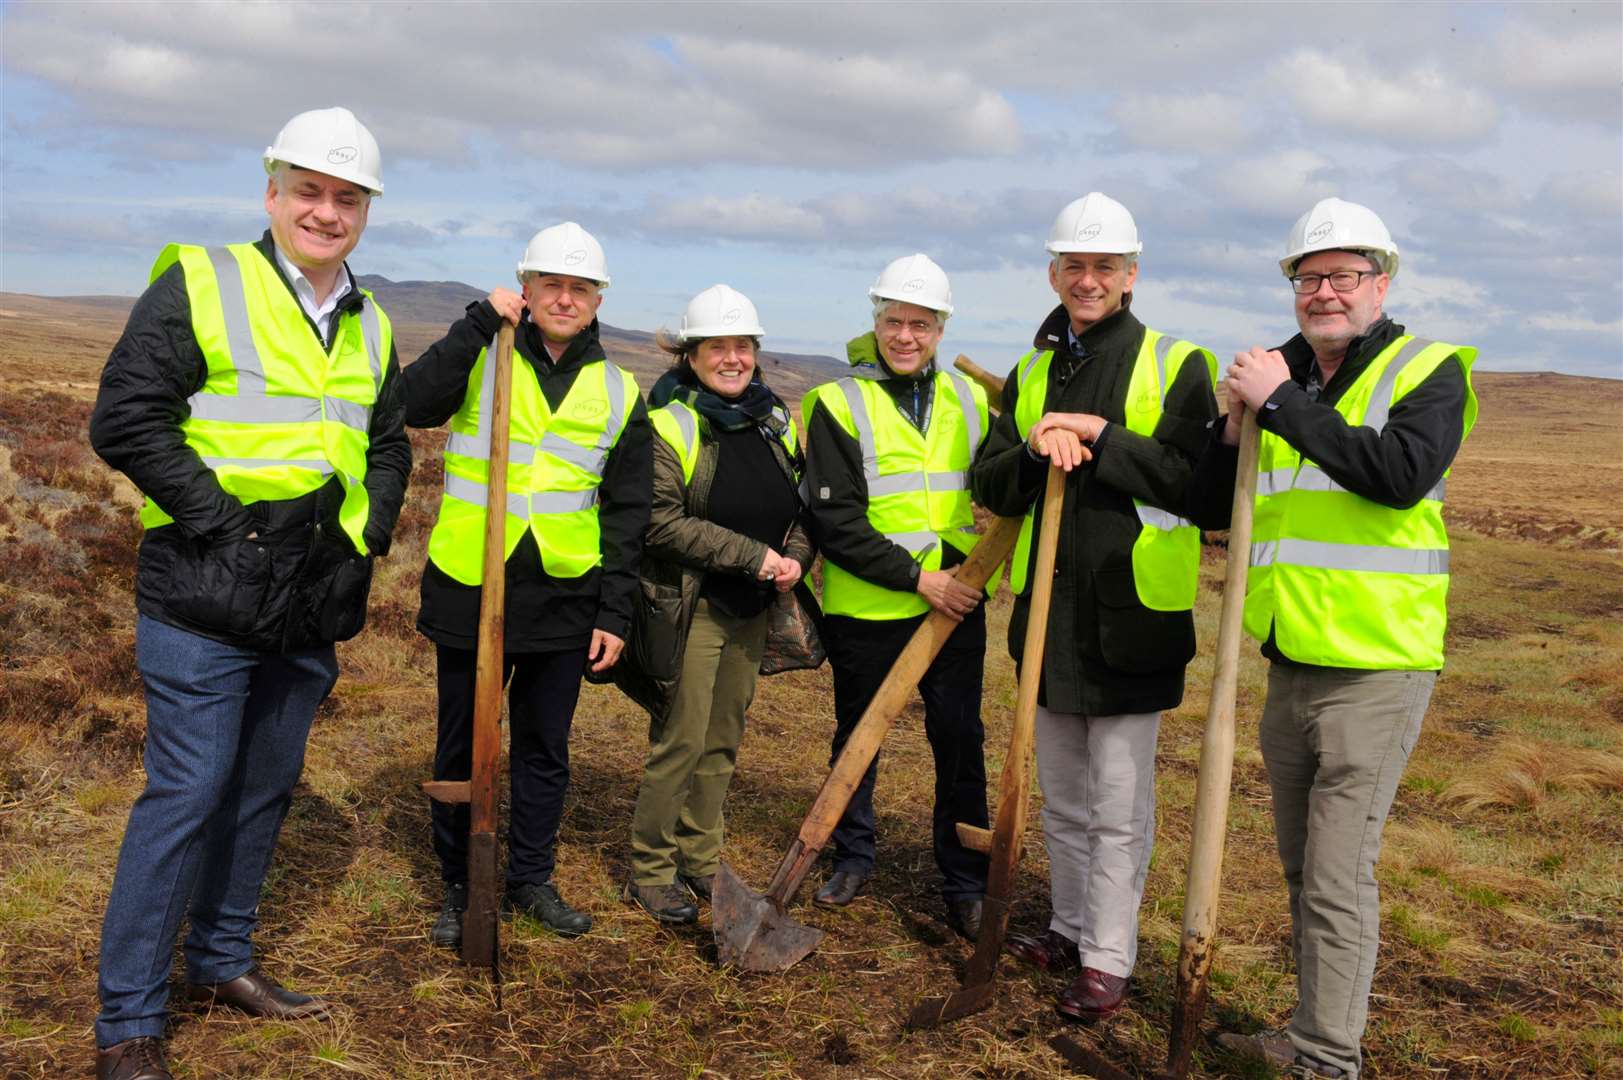 Ground-breaking - Richard Lochhead MSP, Orbex CEO Kristian von Bengtson, chair of Melness Crofters’ Estate, Dorothy Pritchard, Orbex chairman Bart Markus, UK Space Agency deputy CEO Ian Annett, and David Oxley, director of strategic projects at Highlands and Islands Enterprise.